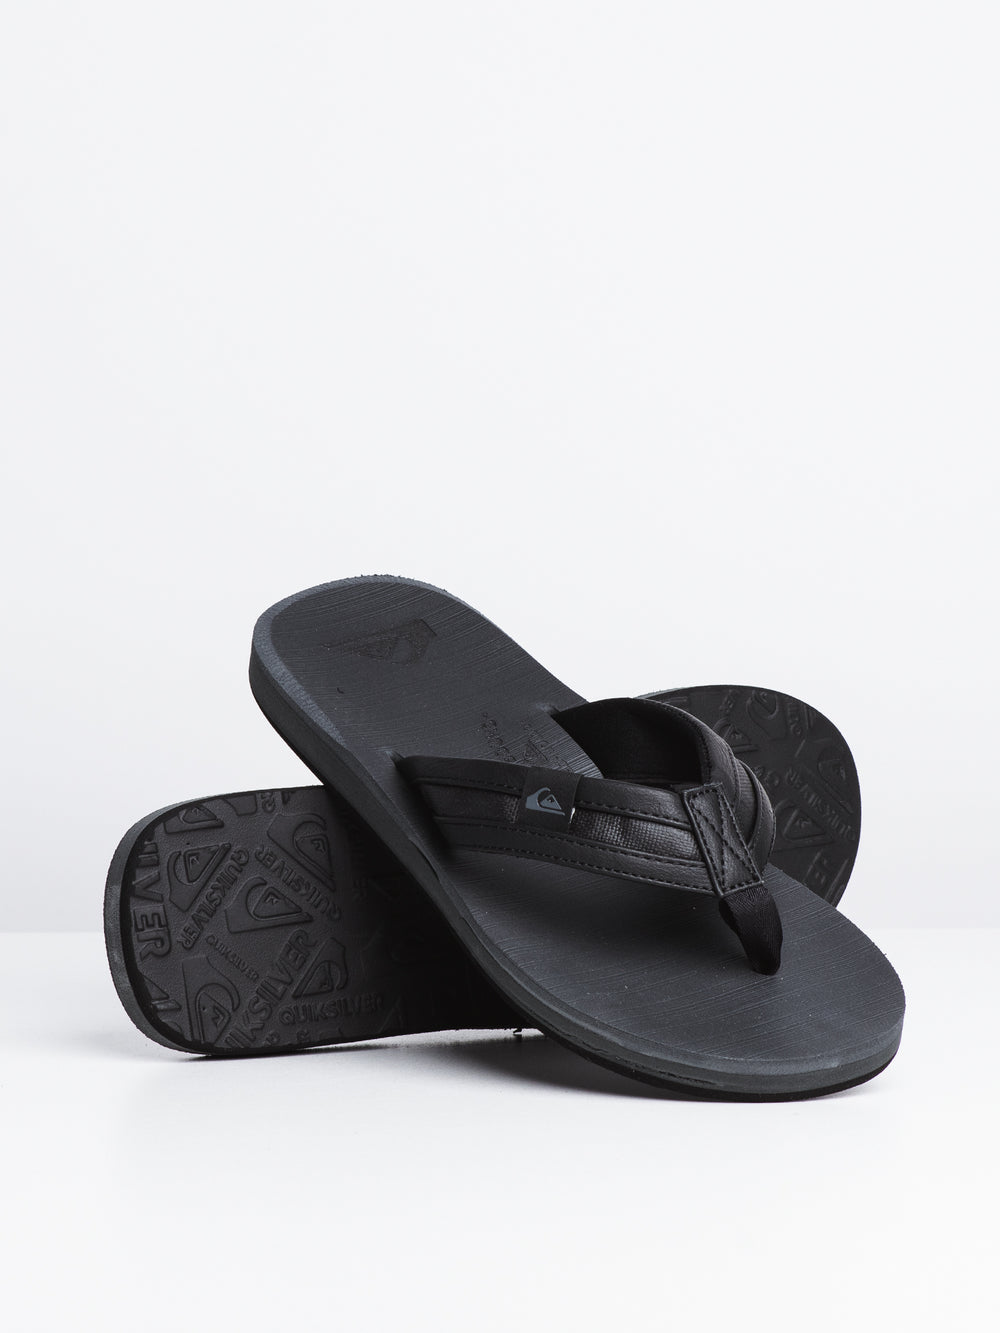 MENS QUIKSILVER CARVER SQUISH SANDALS - CLEARANCE